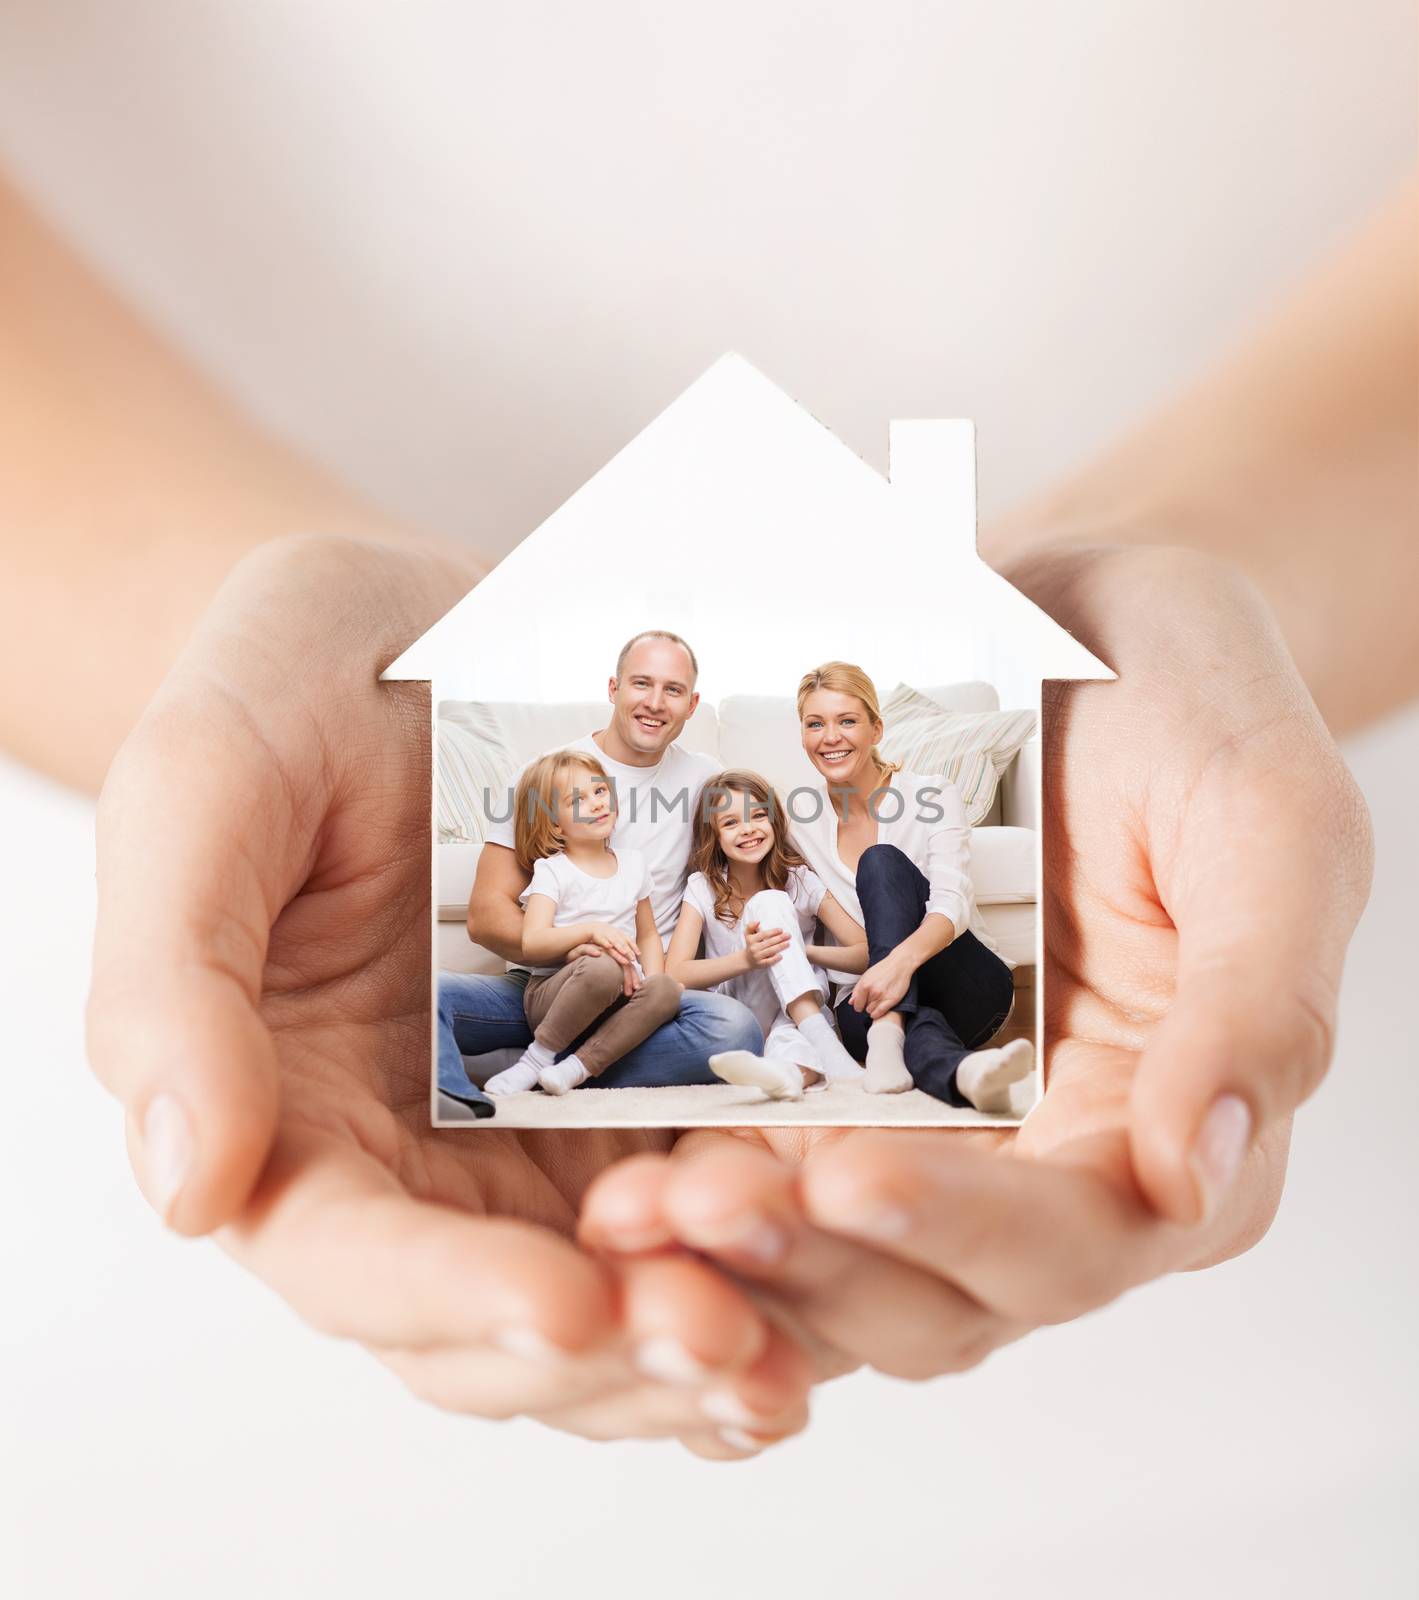 real estate, home insurance and happiness concept - close up of female hands holding white house with happy family picture